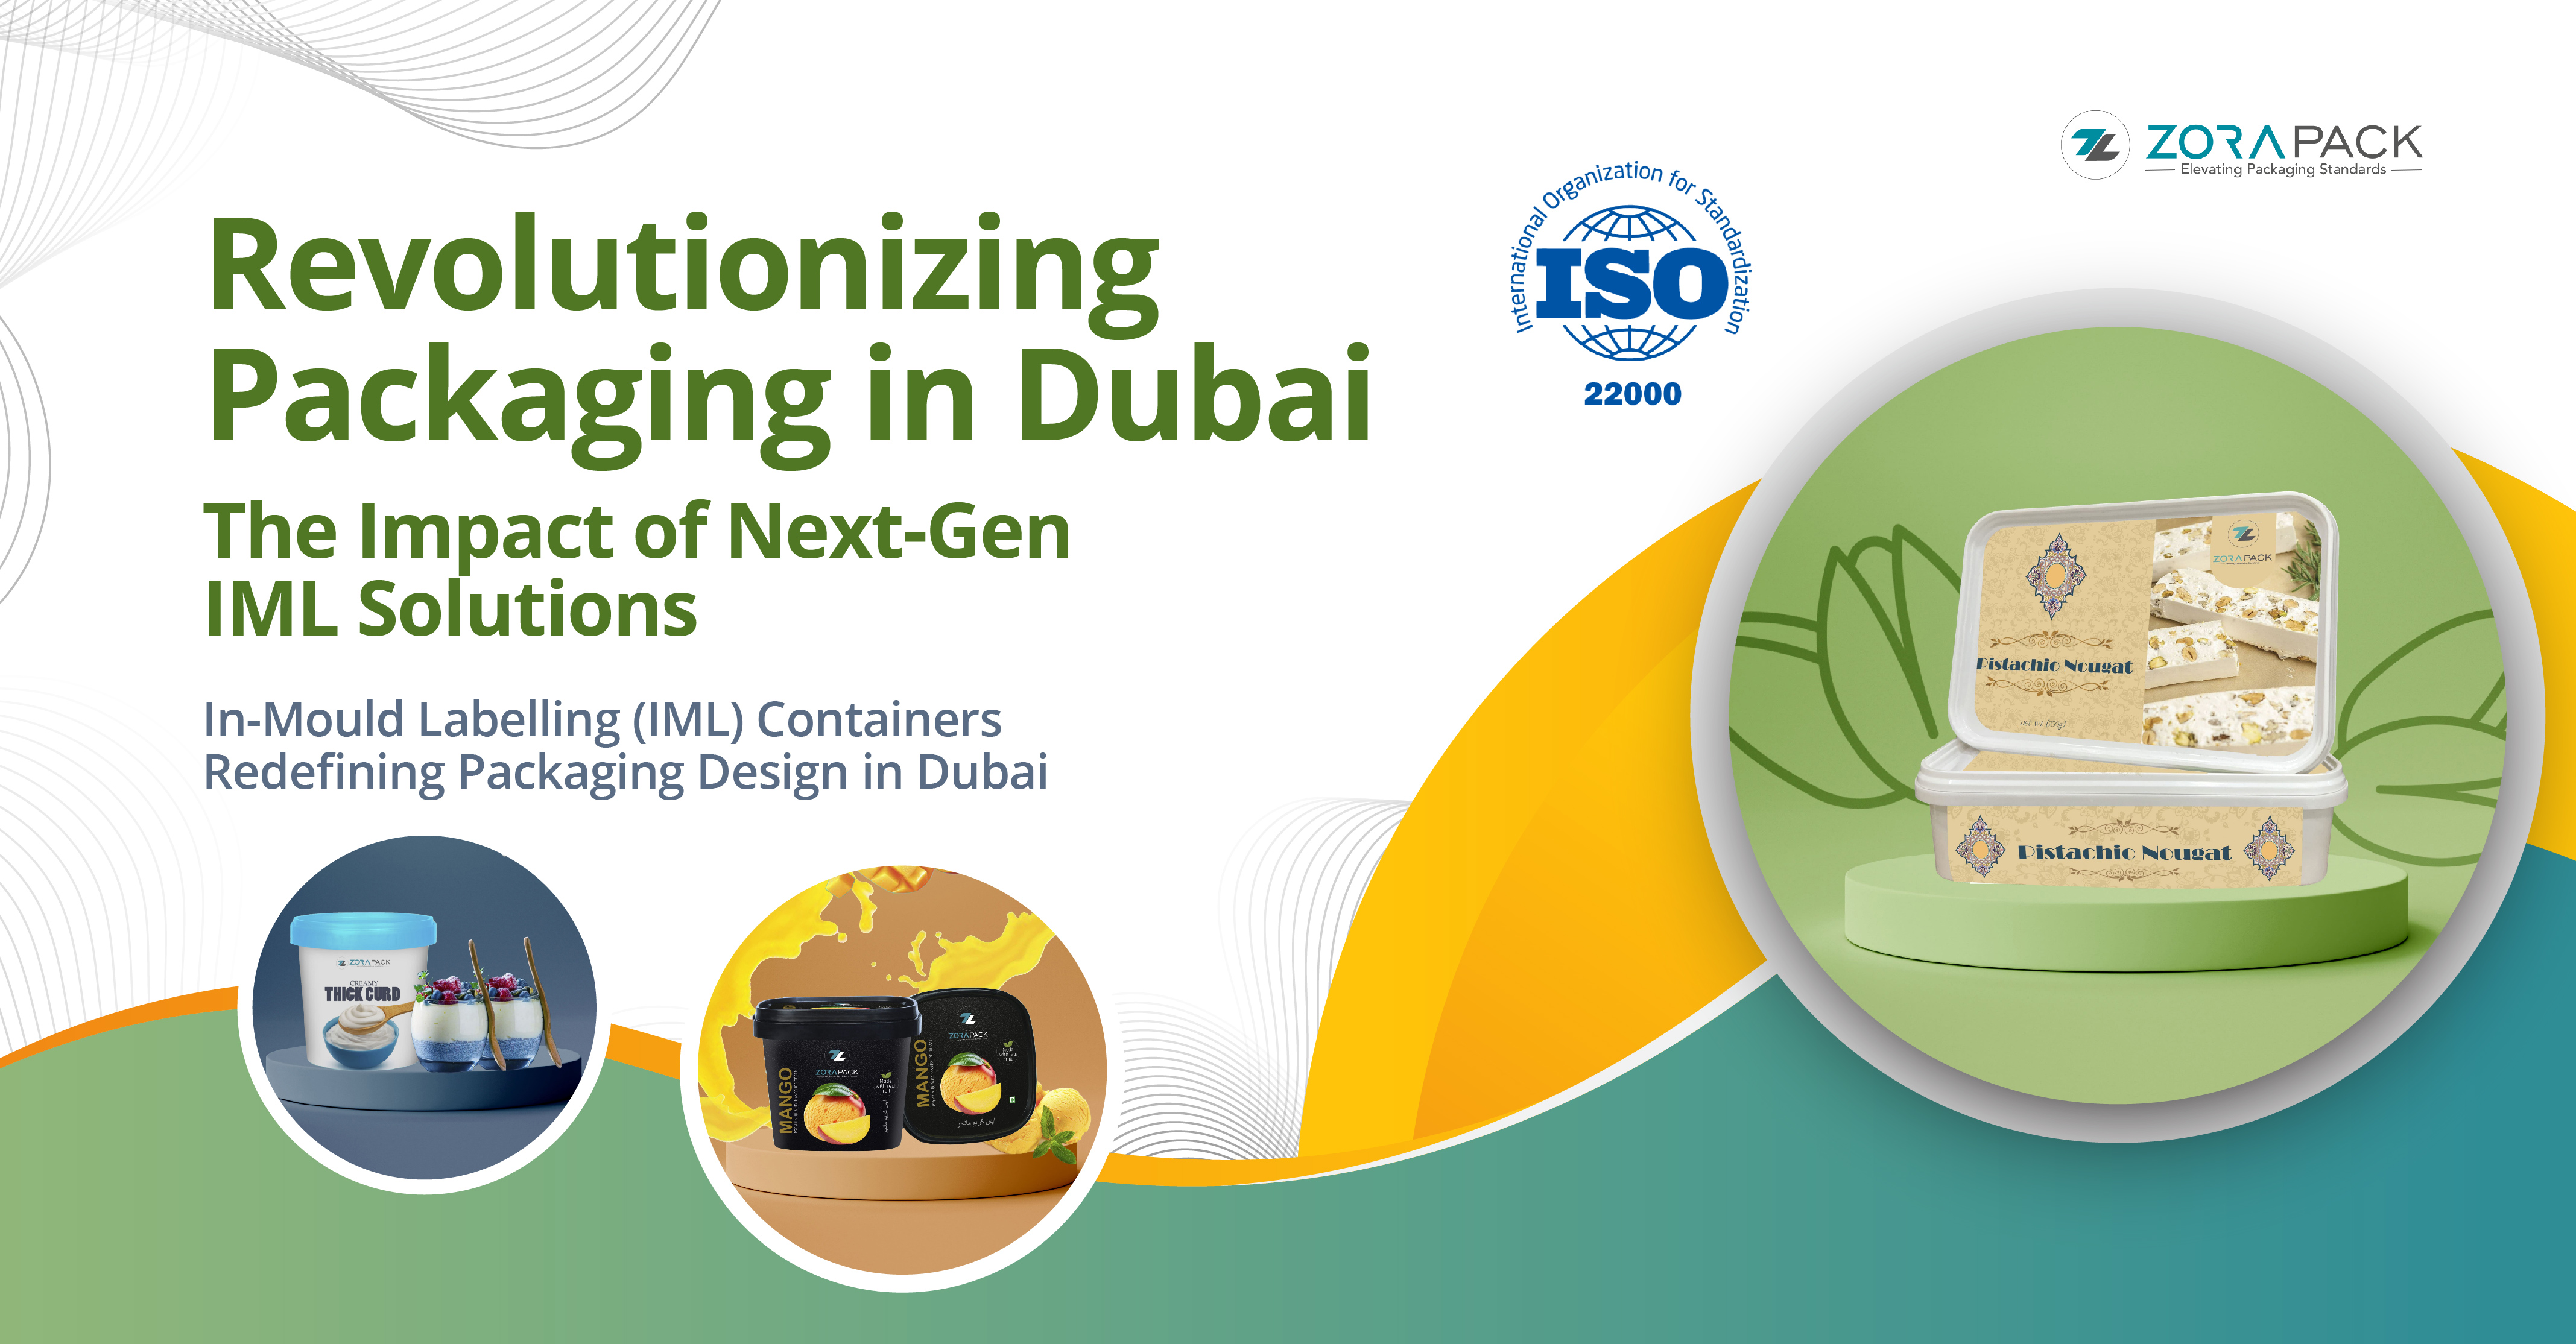 Next-Gen Packaging Trends: A Look Into IML Solutions in Dubai